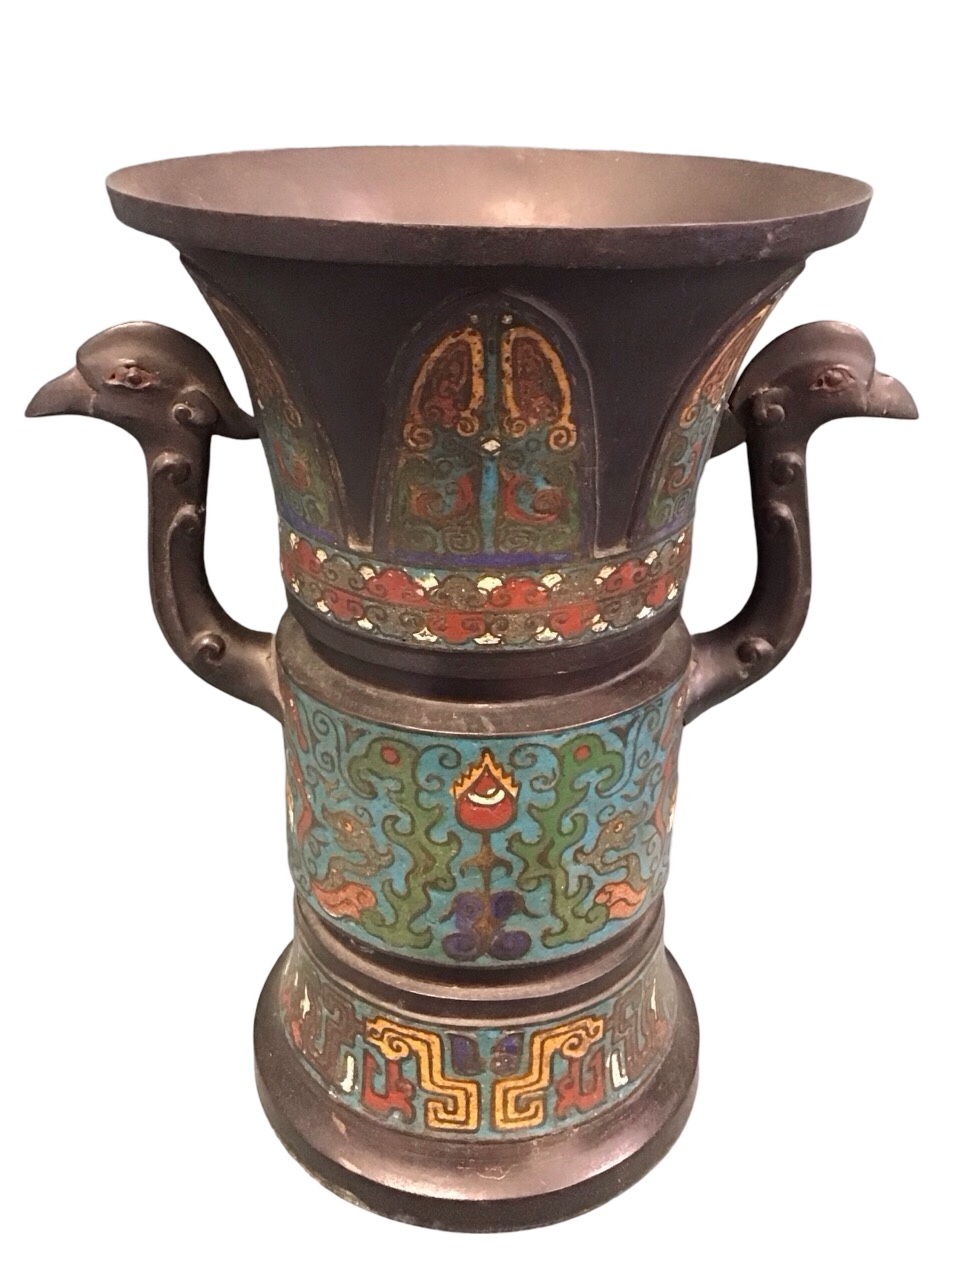 A Chinese bronze and champlevé enamel zum flared cylindrical vase, with bands of archaistic motifs